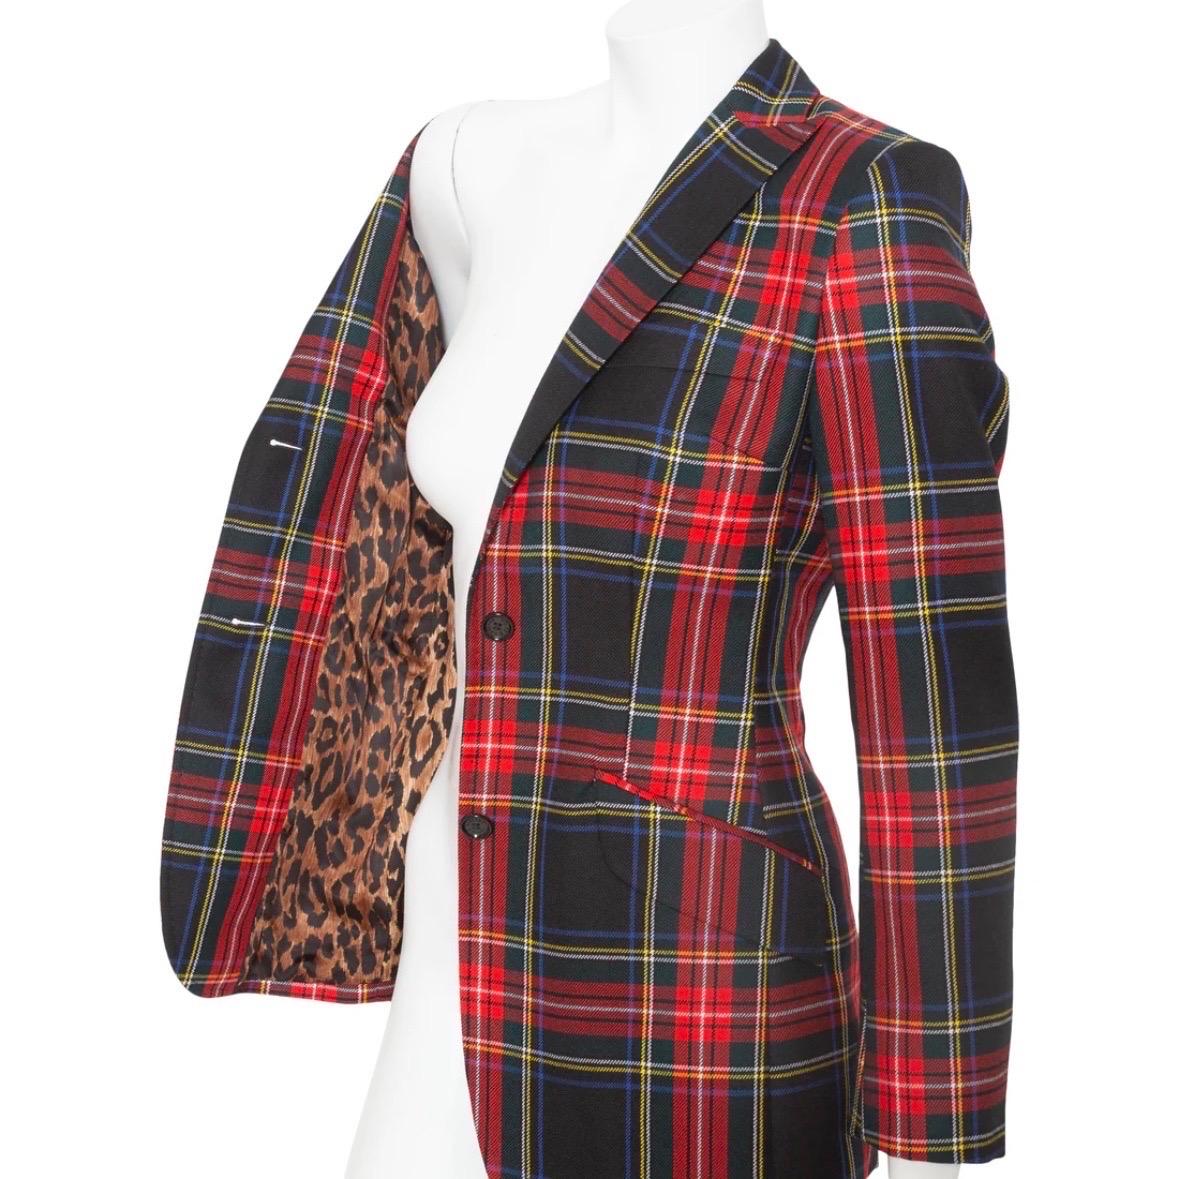 Dolce & Gabbana Red and Navy Wool-Blend Tartan Leopard Print Blazer

Vintage
﻿Red/Navy Blue/Green/Yellow
Tartan pattern
Leopard print lining
Peak lapels
Front flap pockets
Button details at cuffs
Made in Italy
No fabric composition label; wool-blend